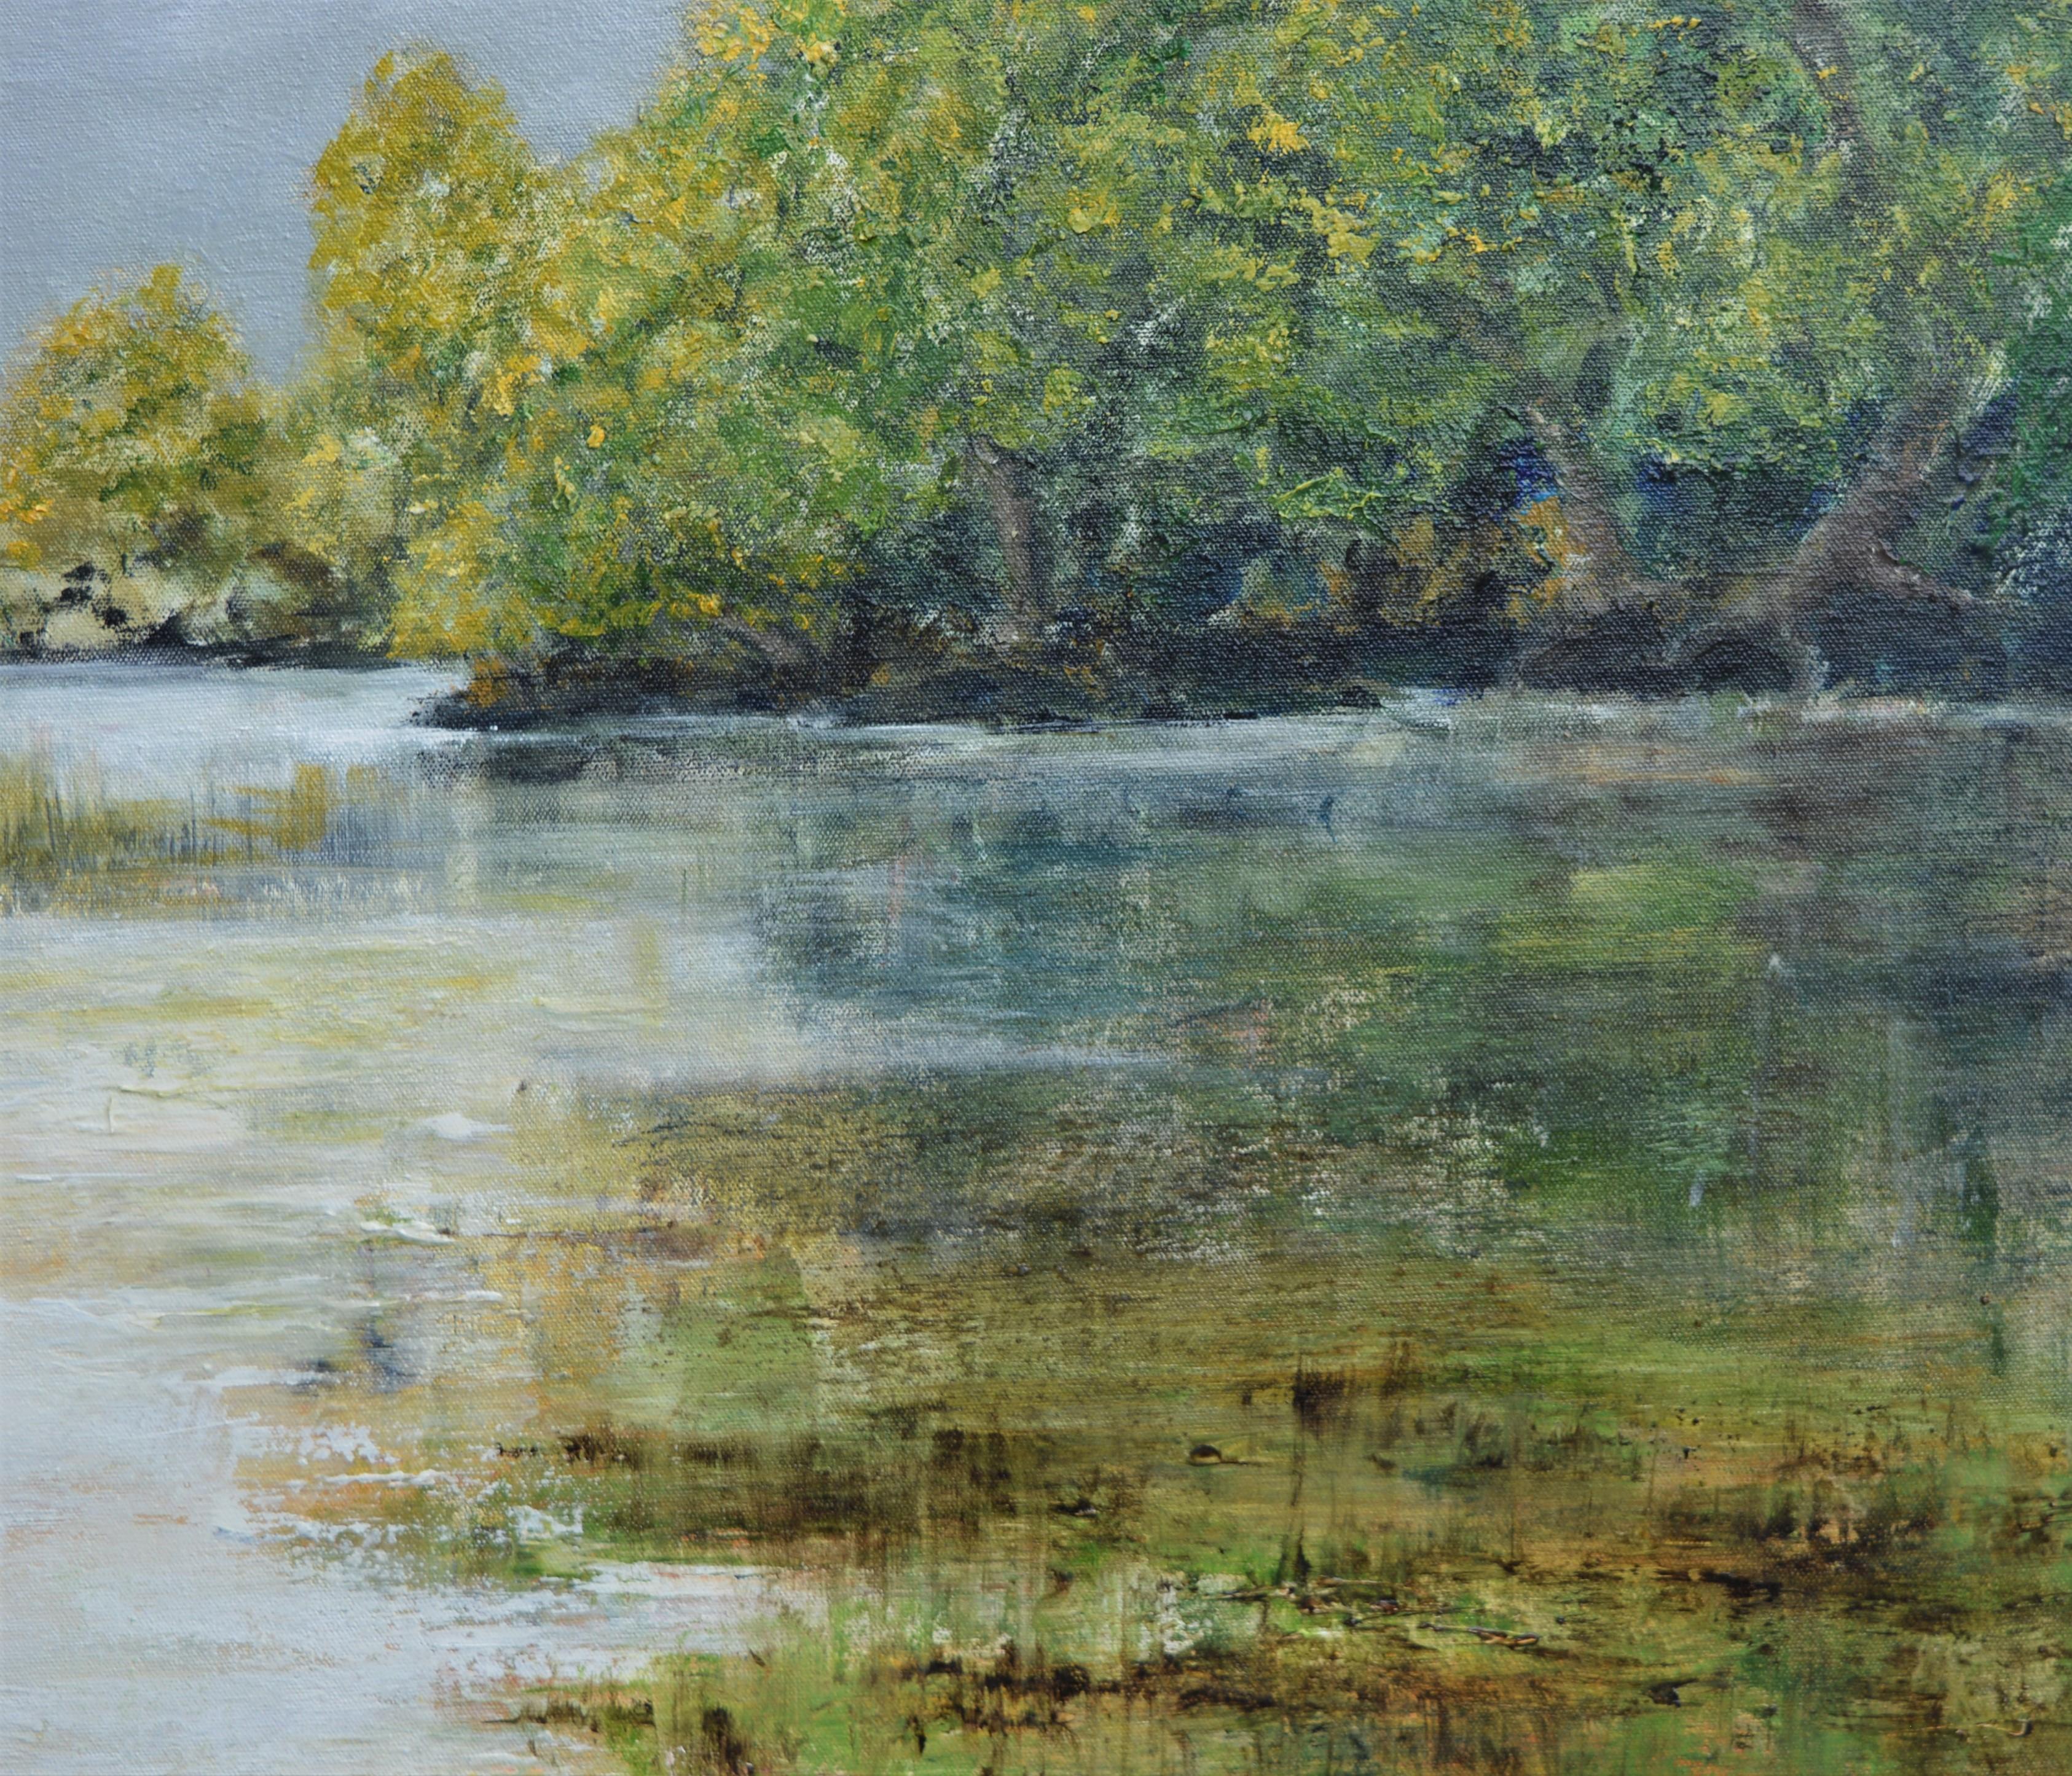 
A RIVER FLOWS THROUGH
oil on canvas
75 x 100 cm + edge frame

A river estuary is home to so many different animal species. There are quiet creeks where sea bass gather and egrets poke about on the muddy shoreline. Here an abundance of oak rises up